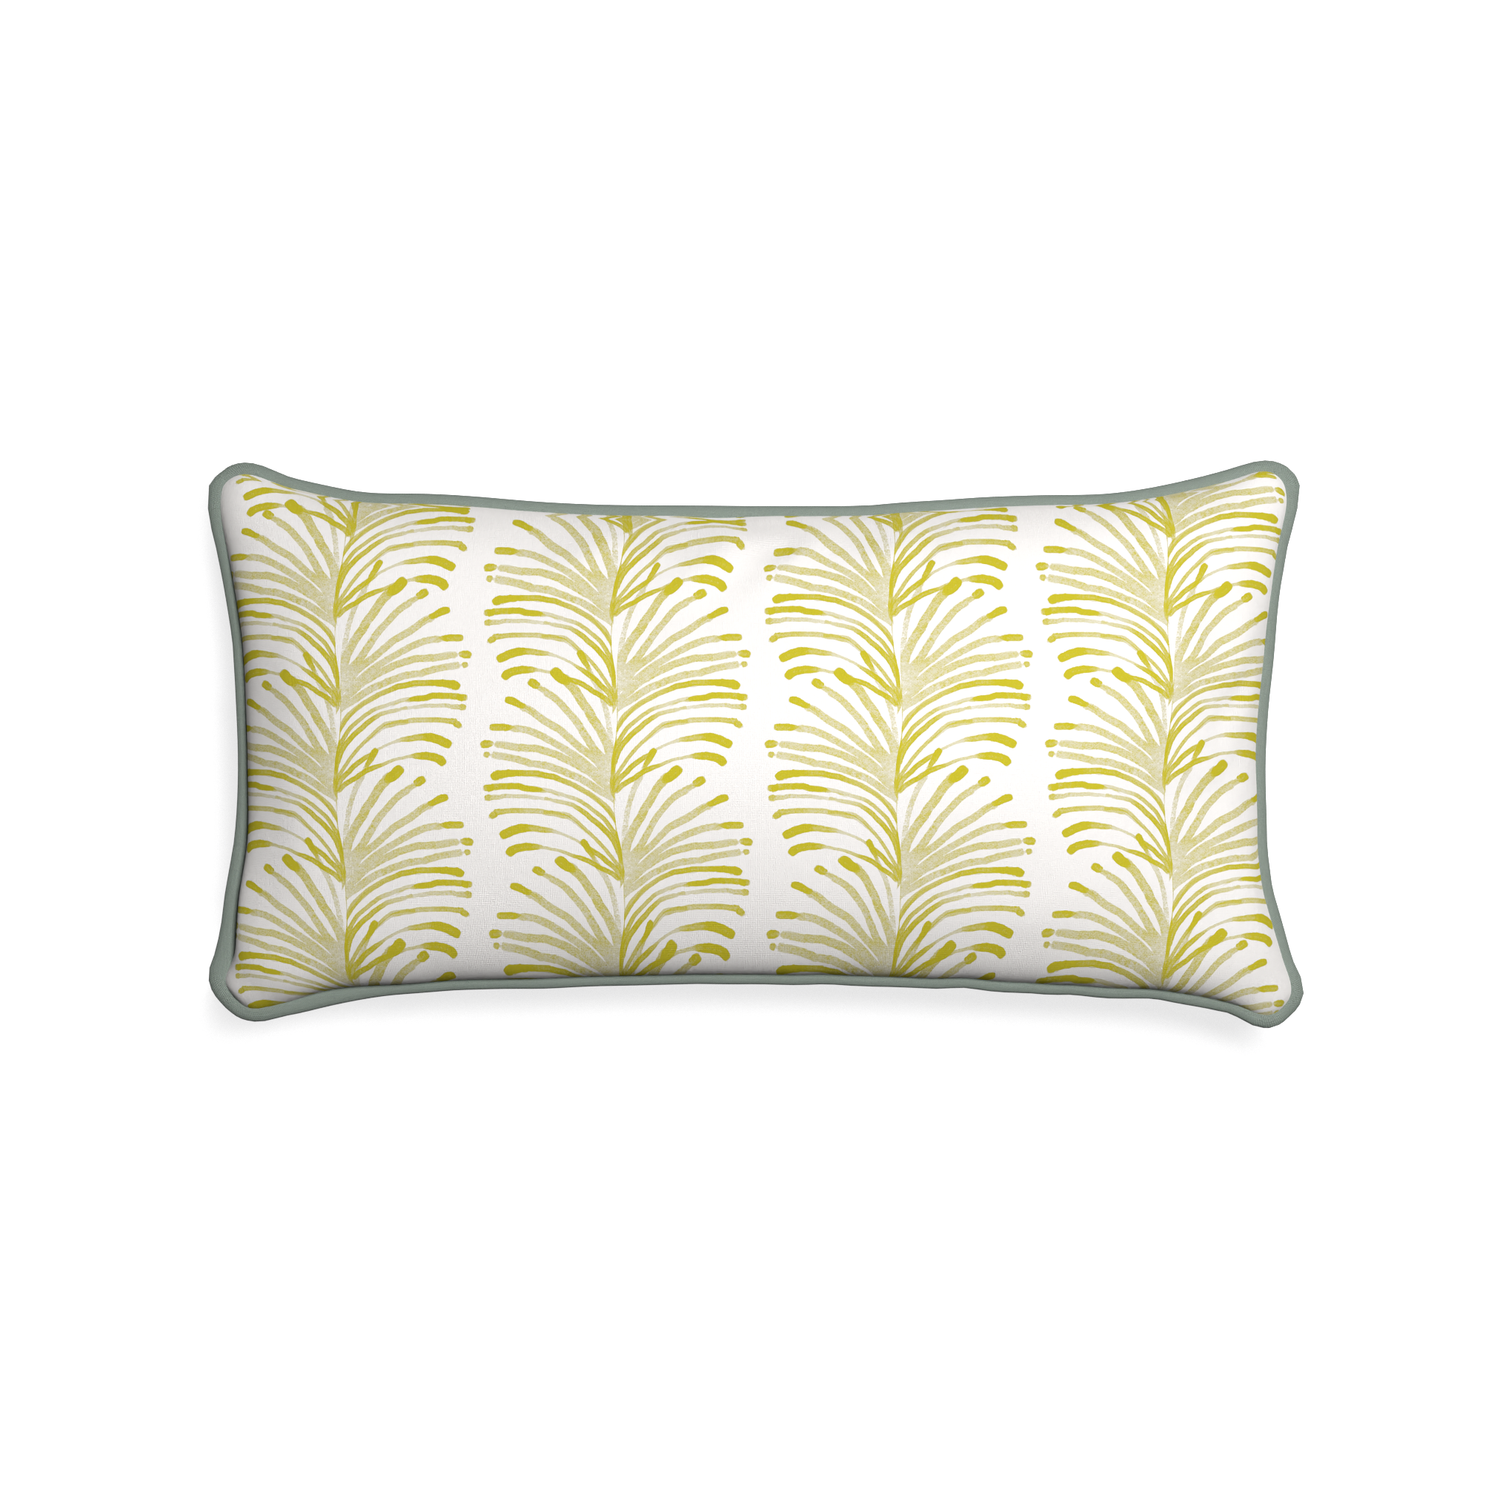 Midi-lumbar emma chartreuse custom yellow stripe chartreusepillow with sage piping on white background